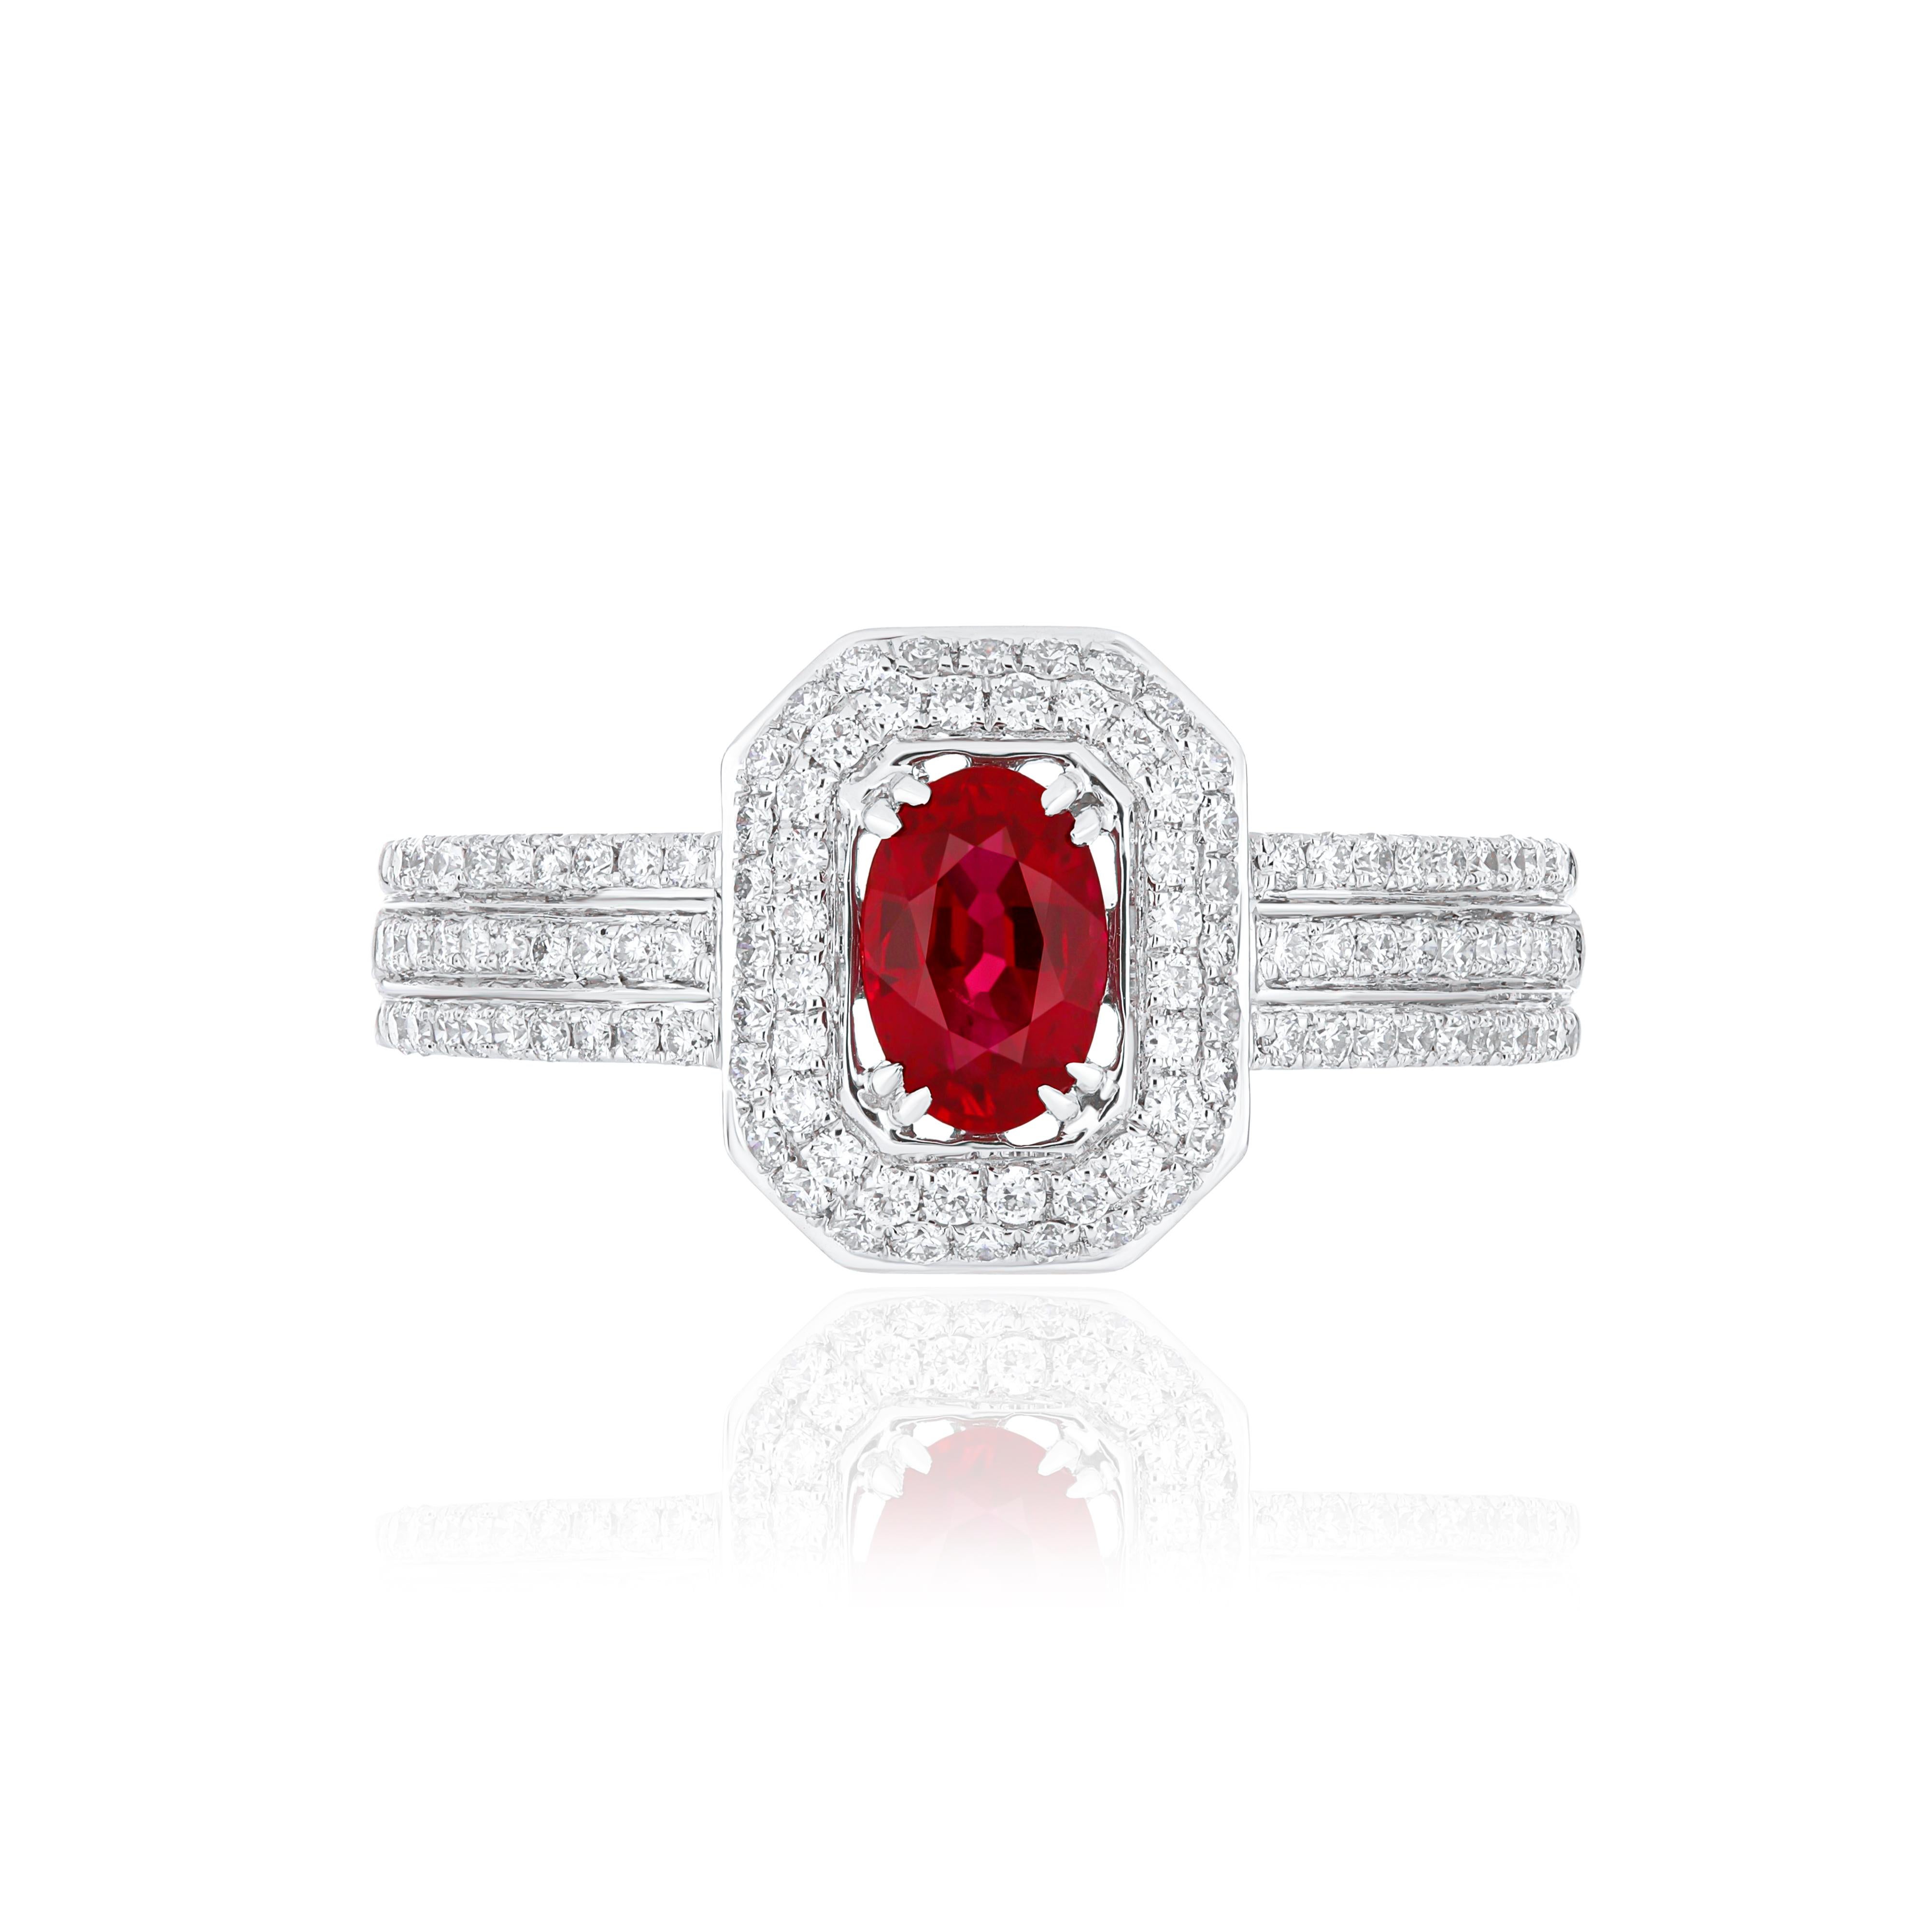 Elegant and exquisitely detailed 18 Karat White Gold Ring, center set with 0.55 CT's .Oval Shape Ruby Mozambique and micro pave set Diamonds, weighing approx. 0.39 CT's Beautifully Hand crafted in 18 Karat White Gold.

Stone Detail:
Ruby Mozambique: